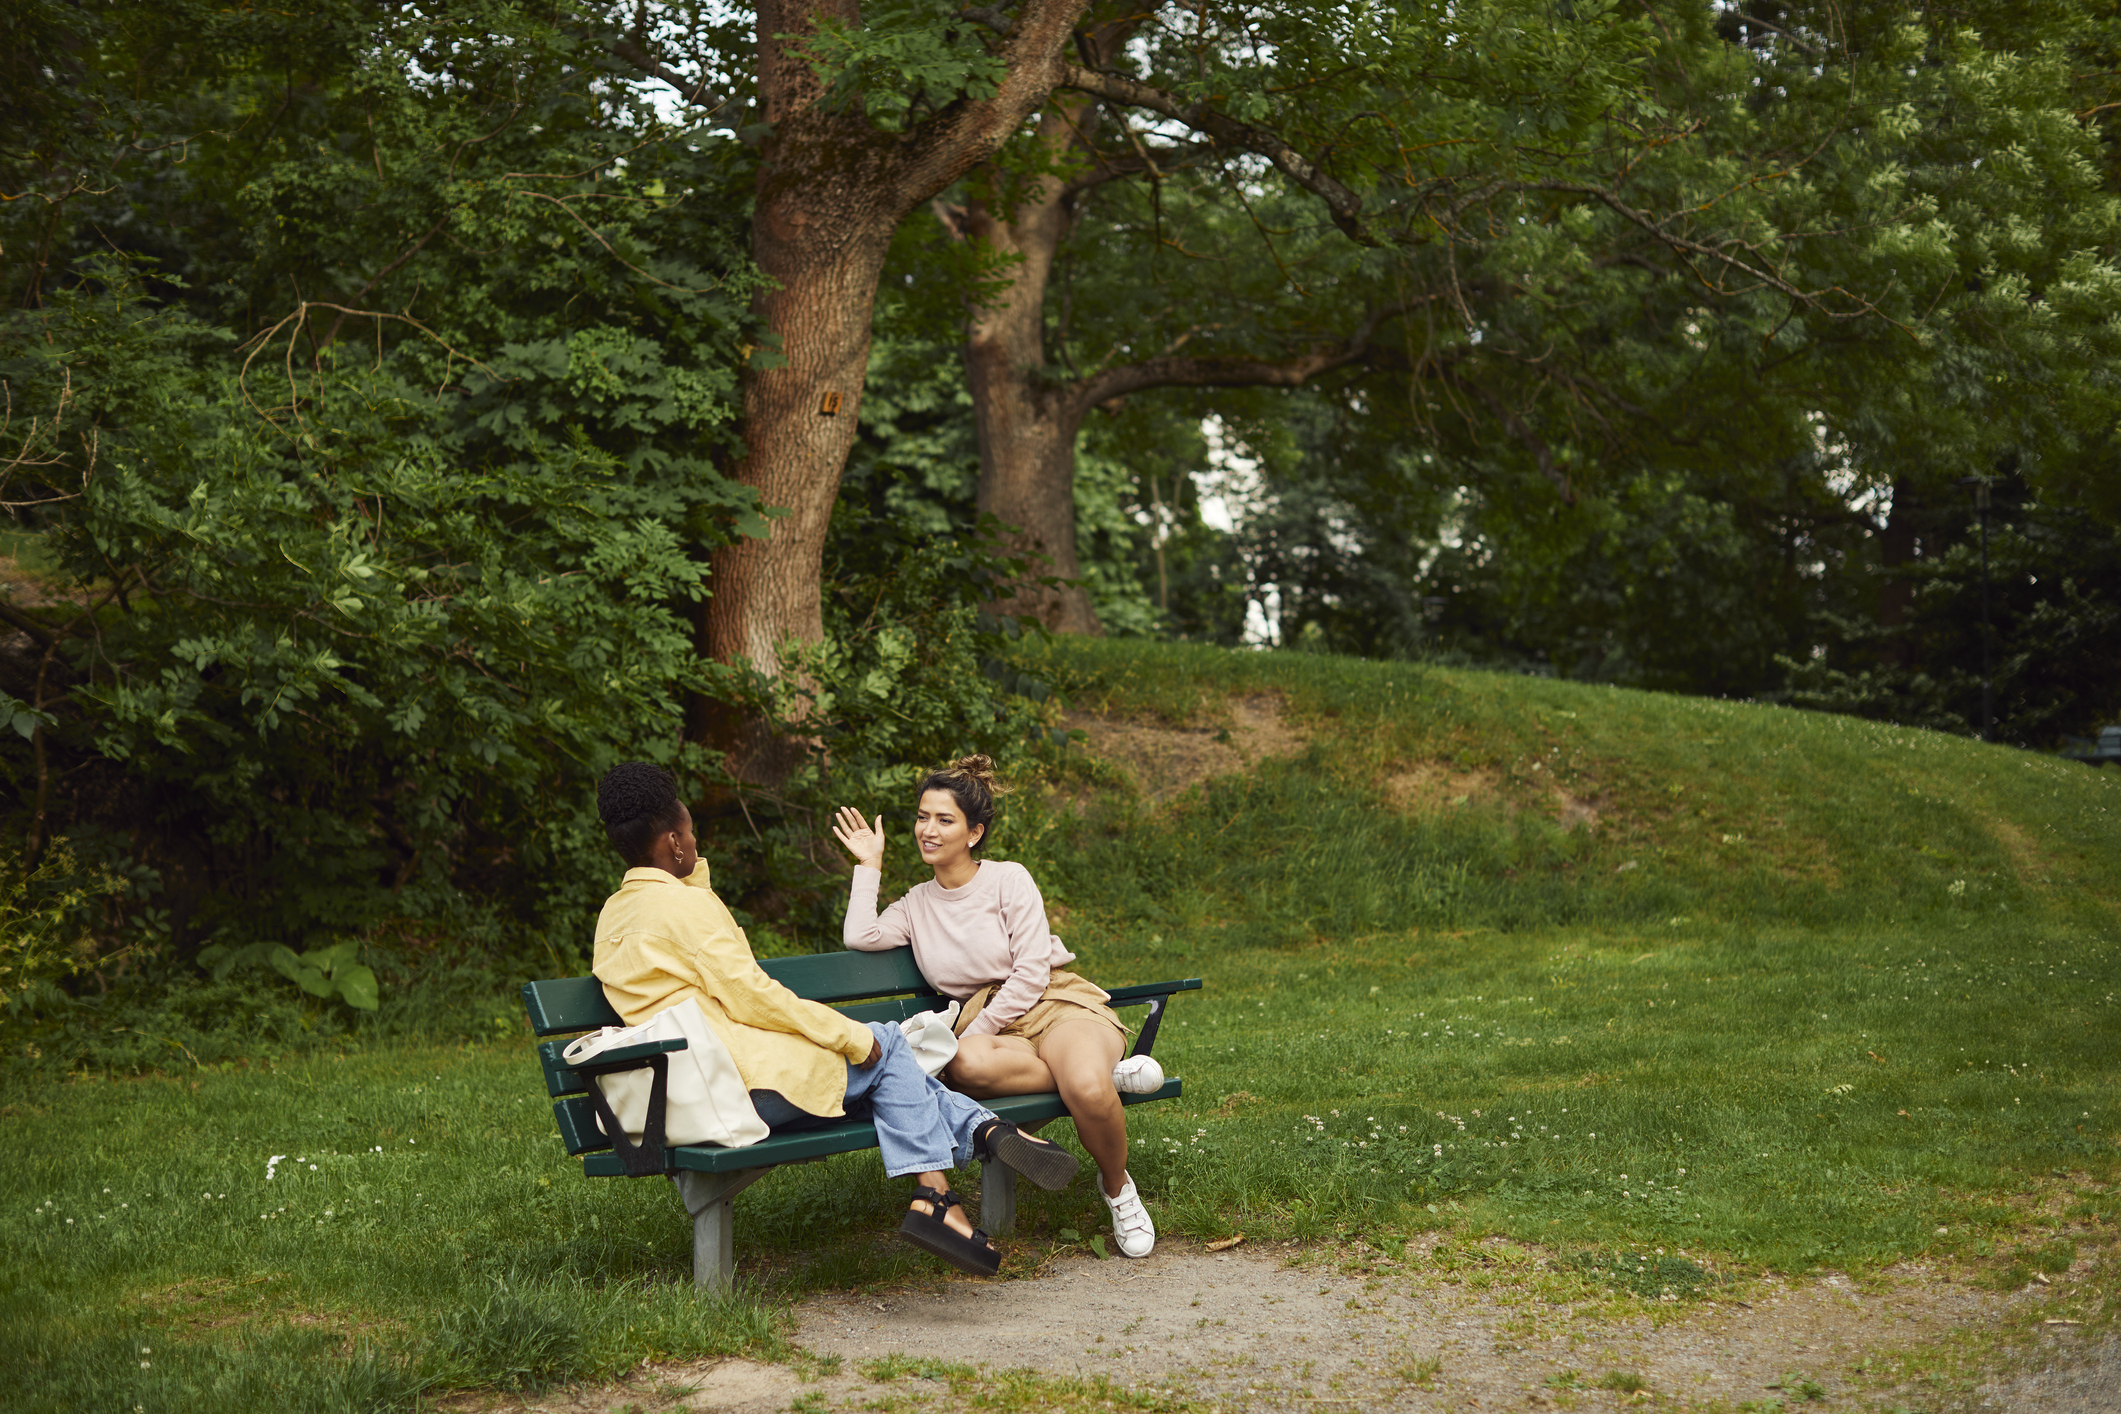 Two friends are sitting on a park bench, talking